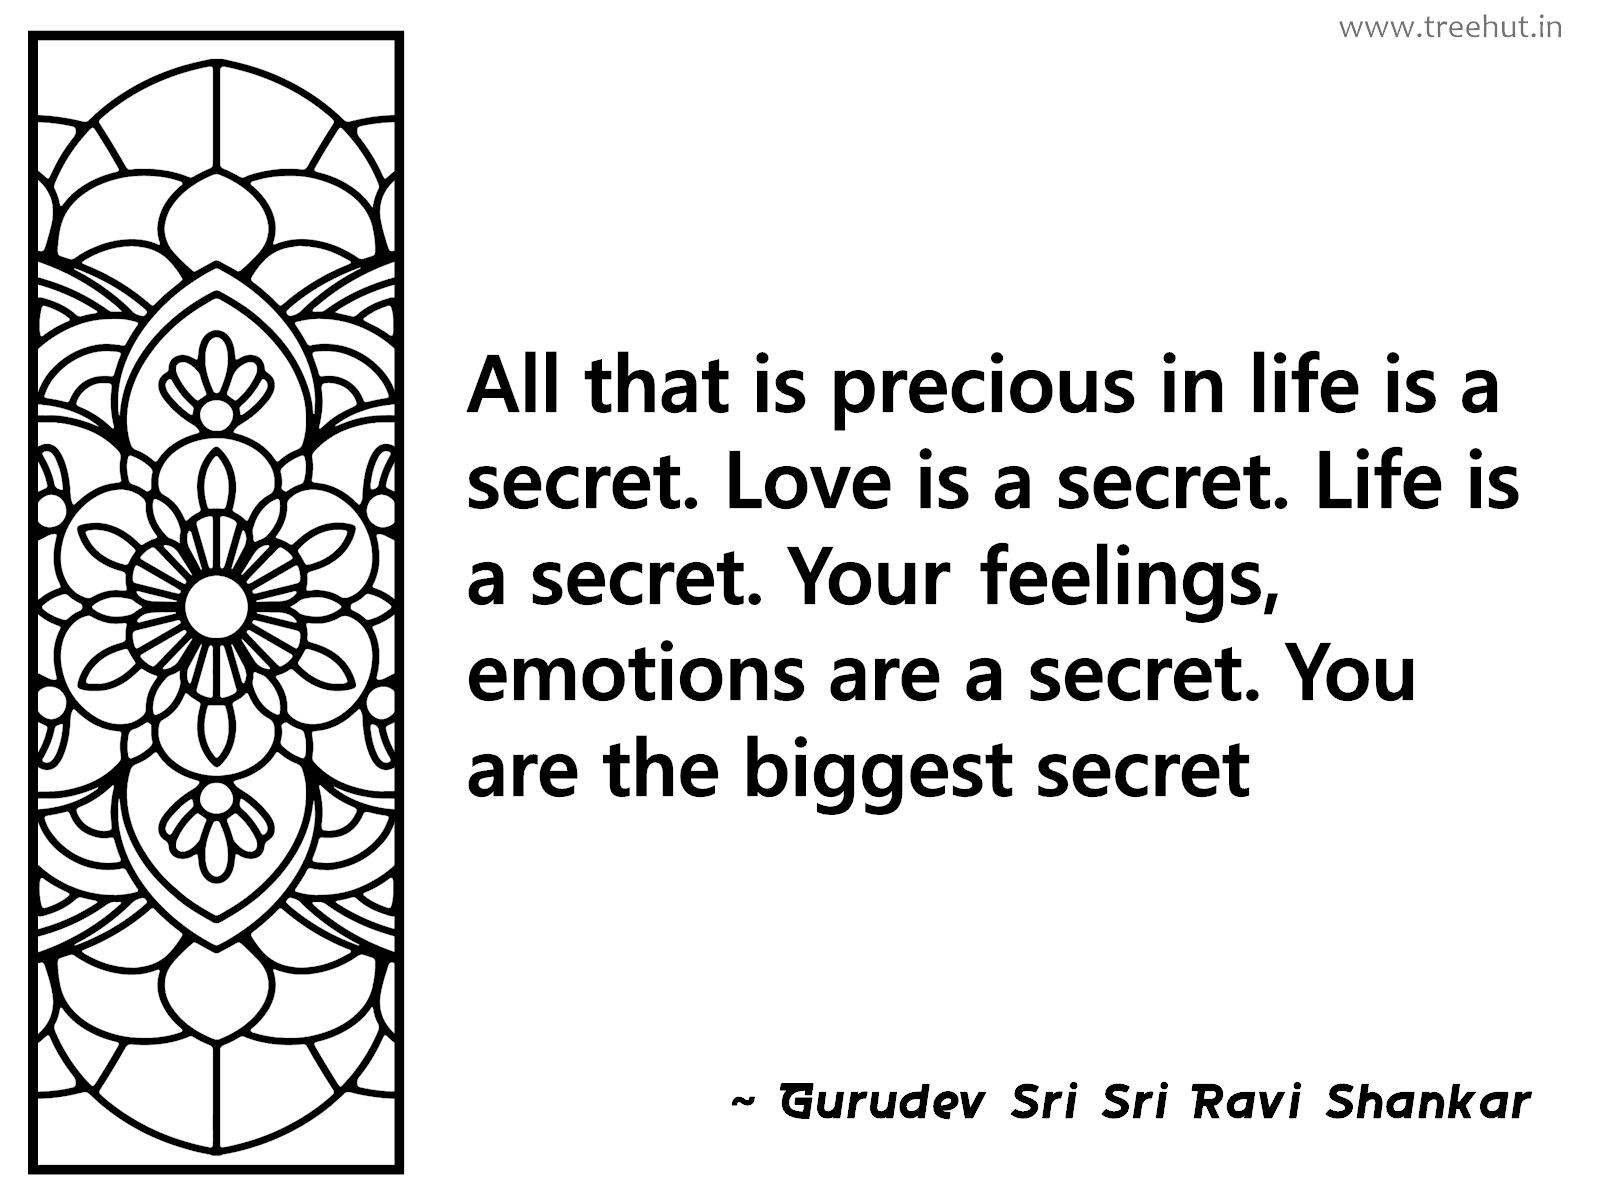 All that is precious in life is a secret. Love is a secret. Life is a secret. Your feelings, emotions are a secret. You are the biggest secret Inspirational Quote by Gurudev Sri Sri Ravi Shankar, coloring pages